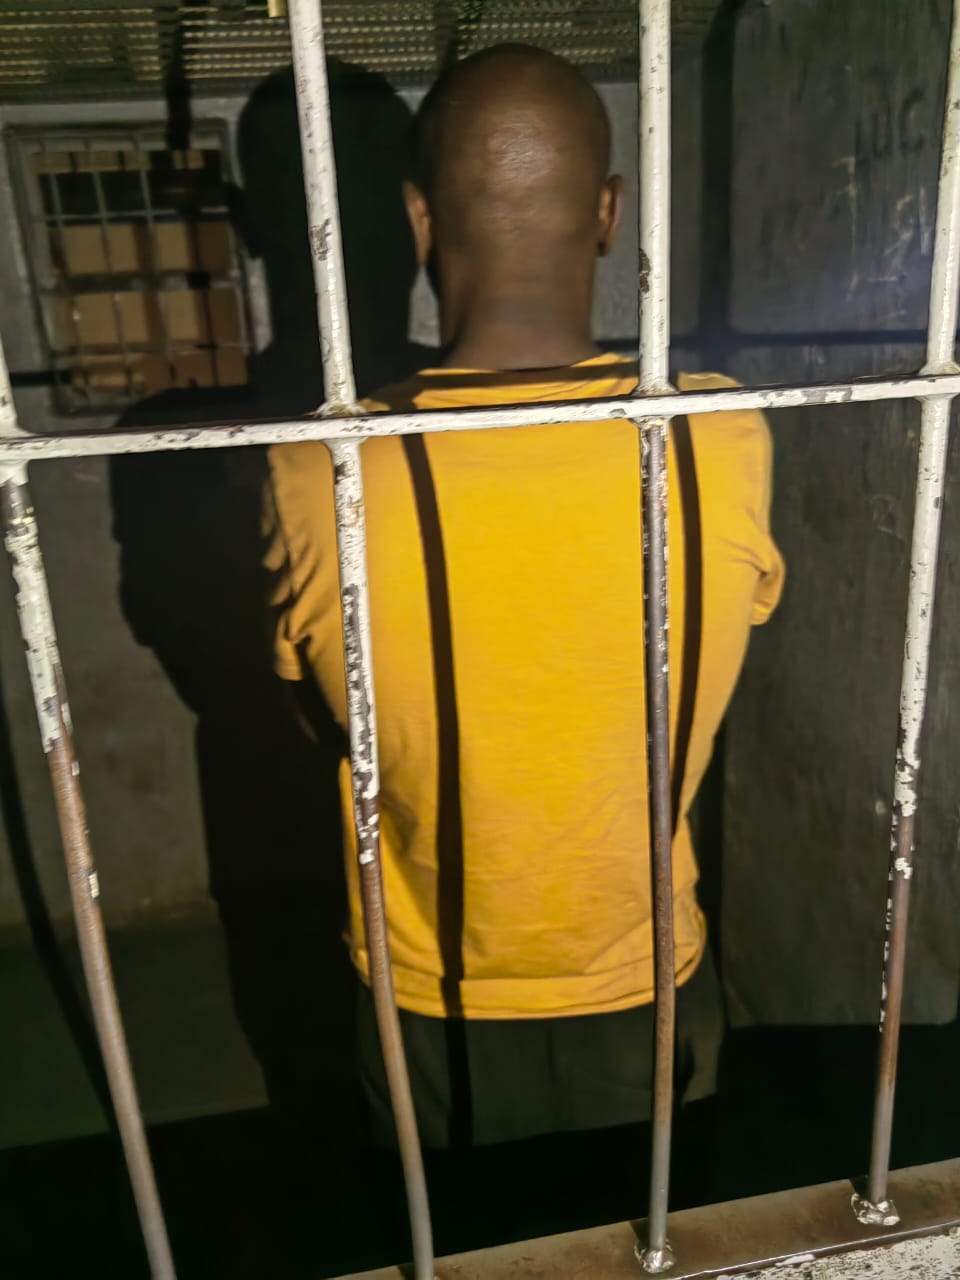 Suspect arrested for the possession of a robbed motor vehicle, in the Etwatwa area